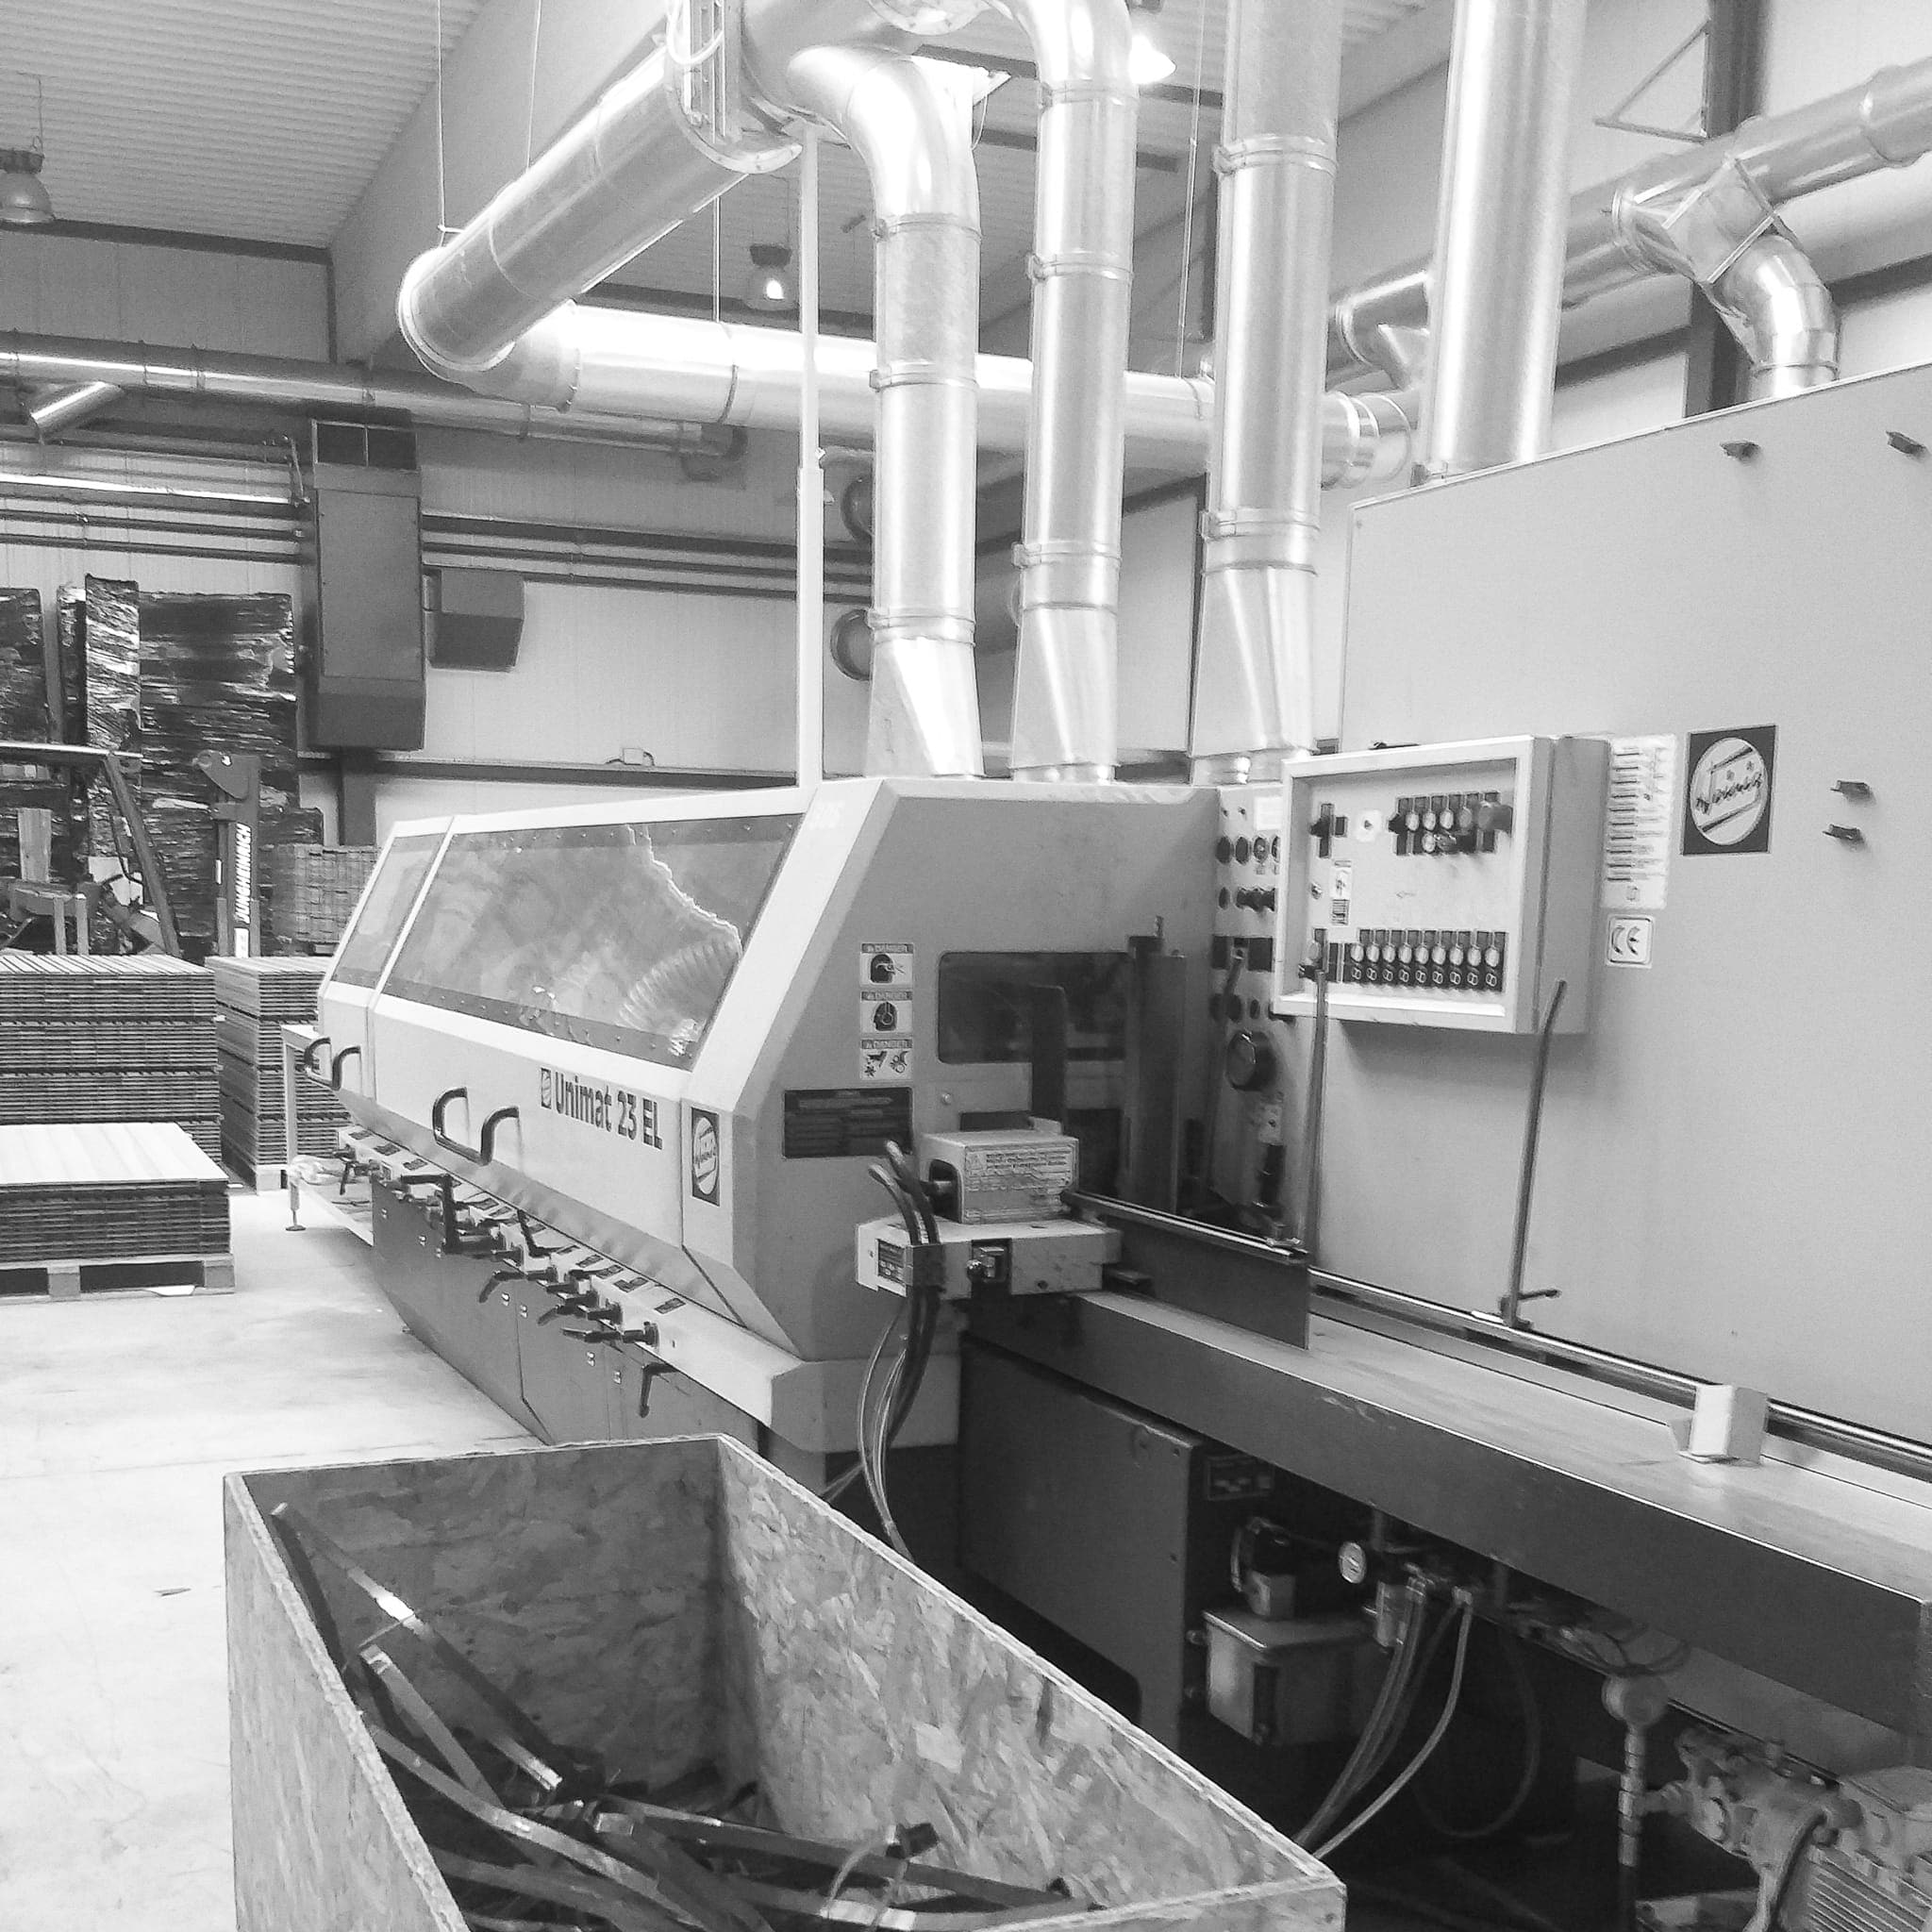 Vetedy introduce new equipment of production in 2009 in belgium